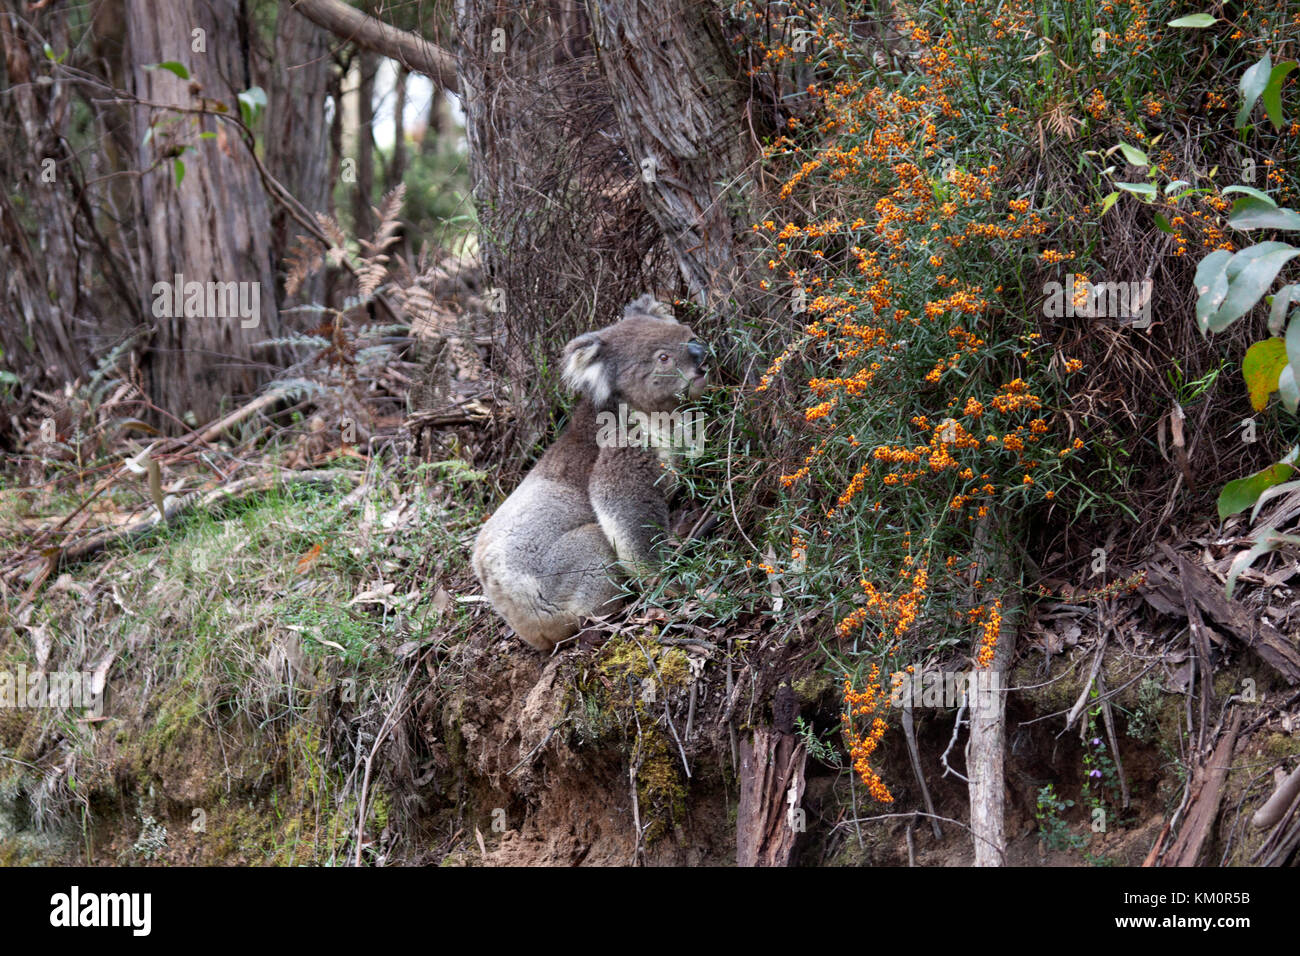 Koala bear on a rare descent to the ground in its natural habitat Great Otway National Park Victoria Australia Stock Photo